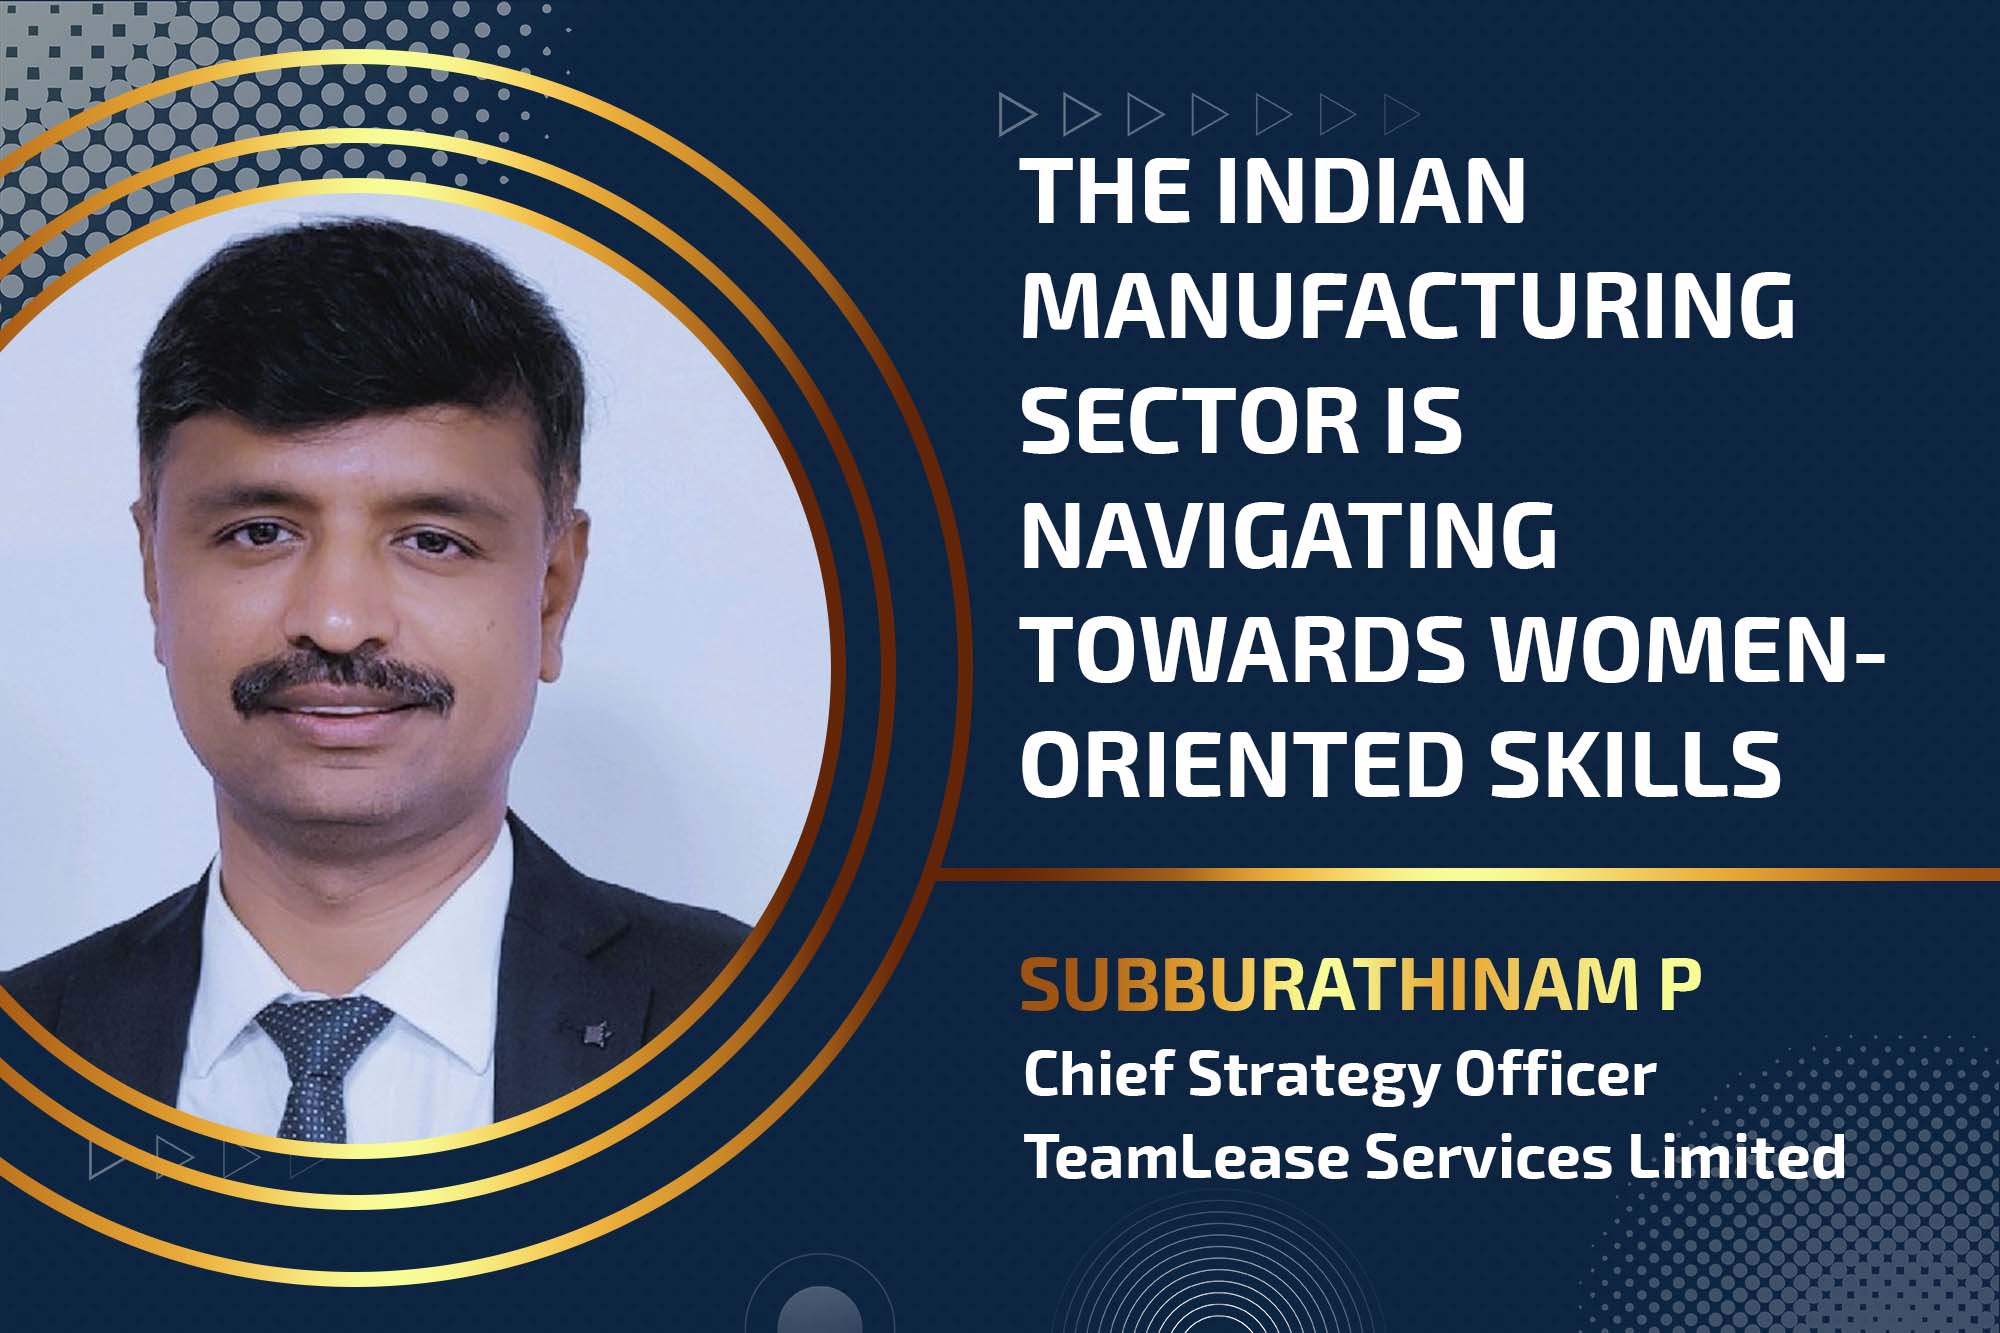 The Indian manufacturing sector is navigating towards women-oriented skills